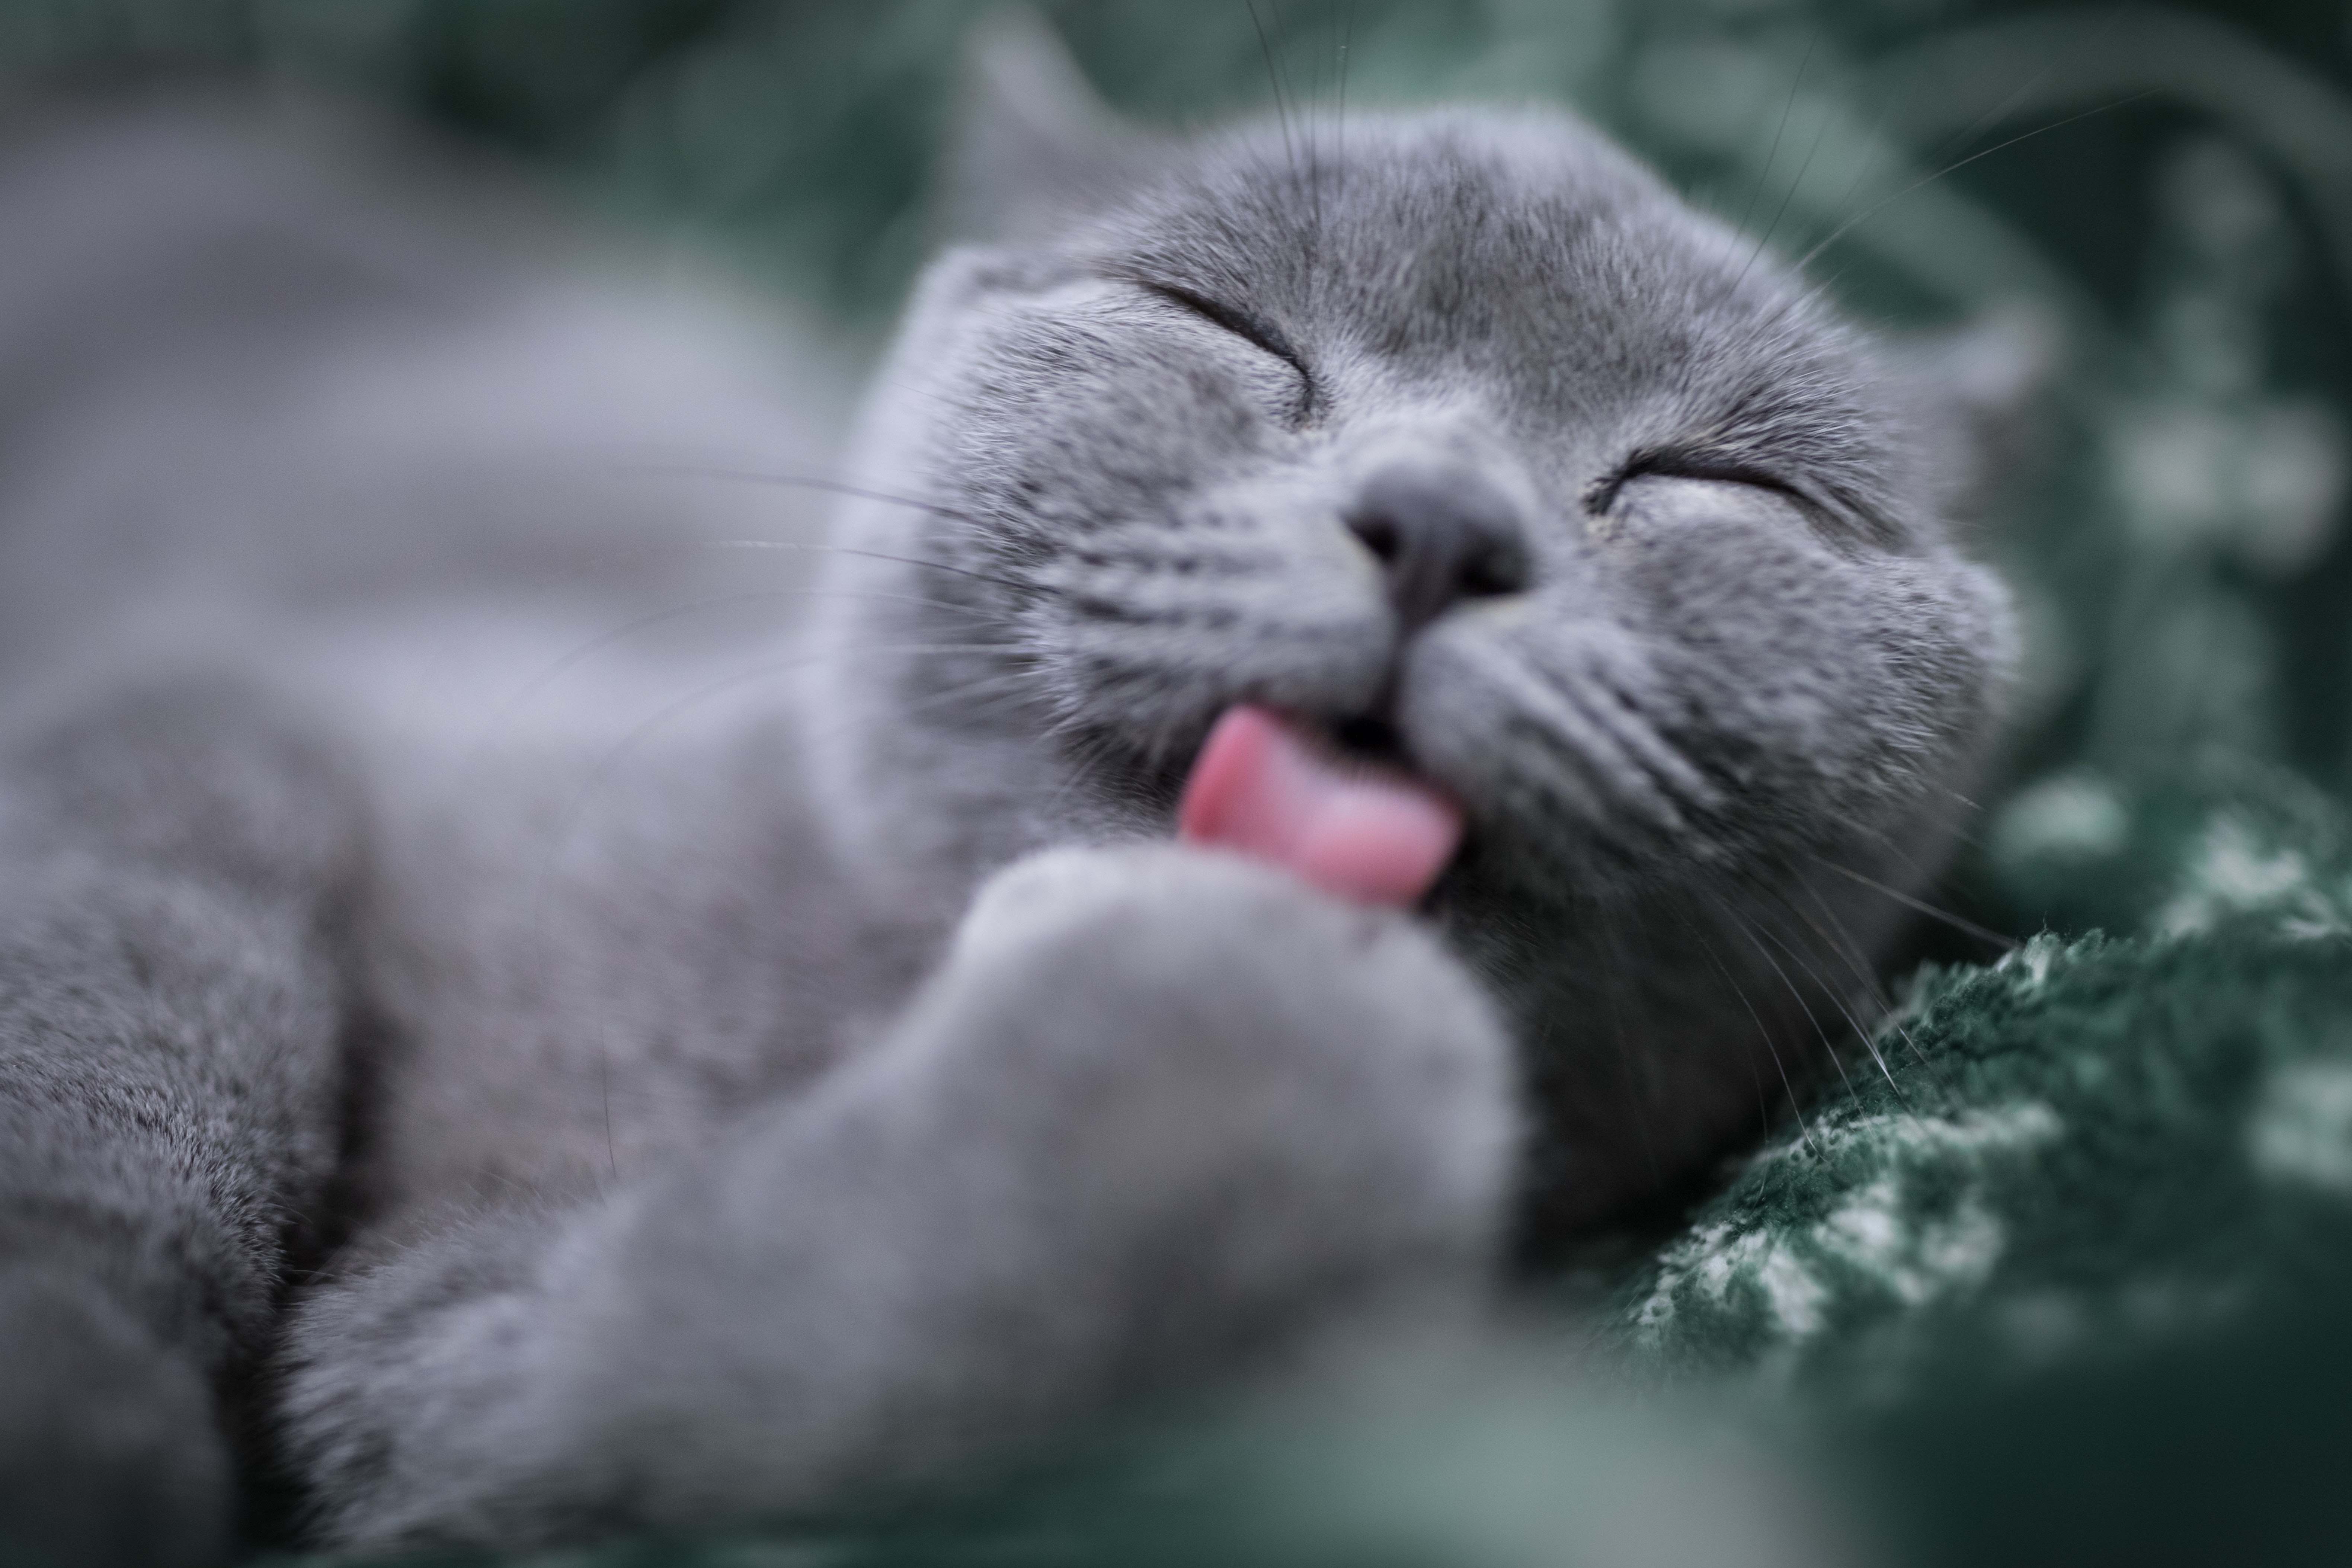 When cats groom themselves, the allergen is transferred from their saliva onto their fur. Image: Eric Han / Unsplash